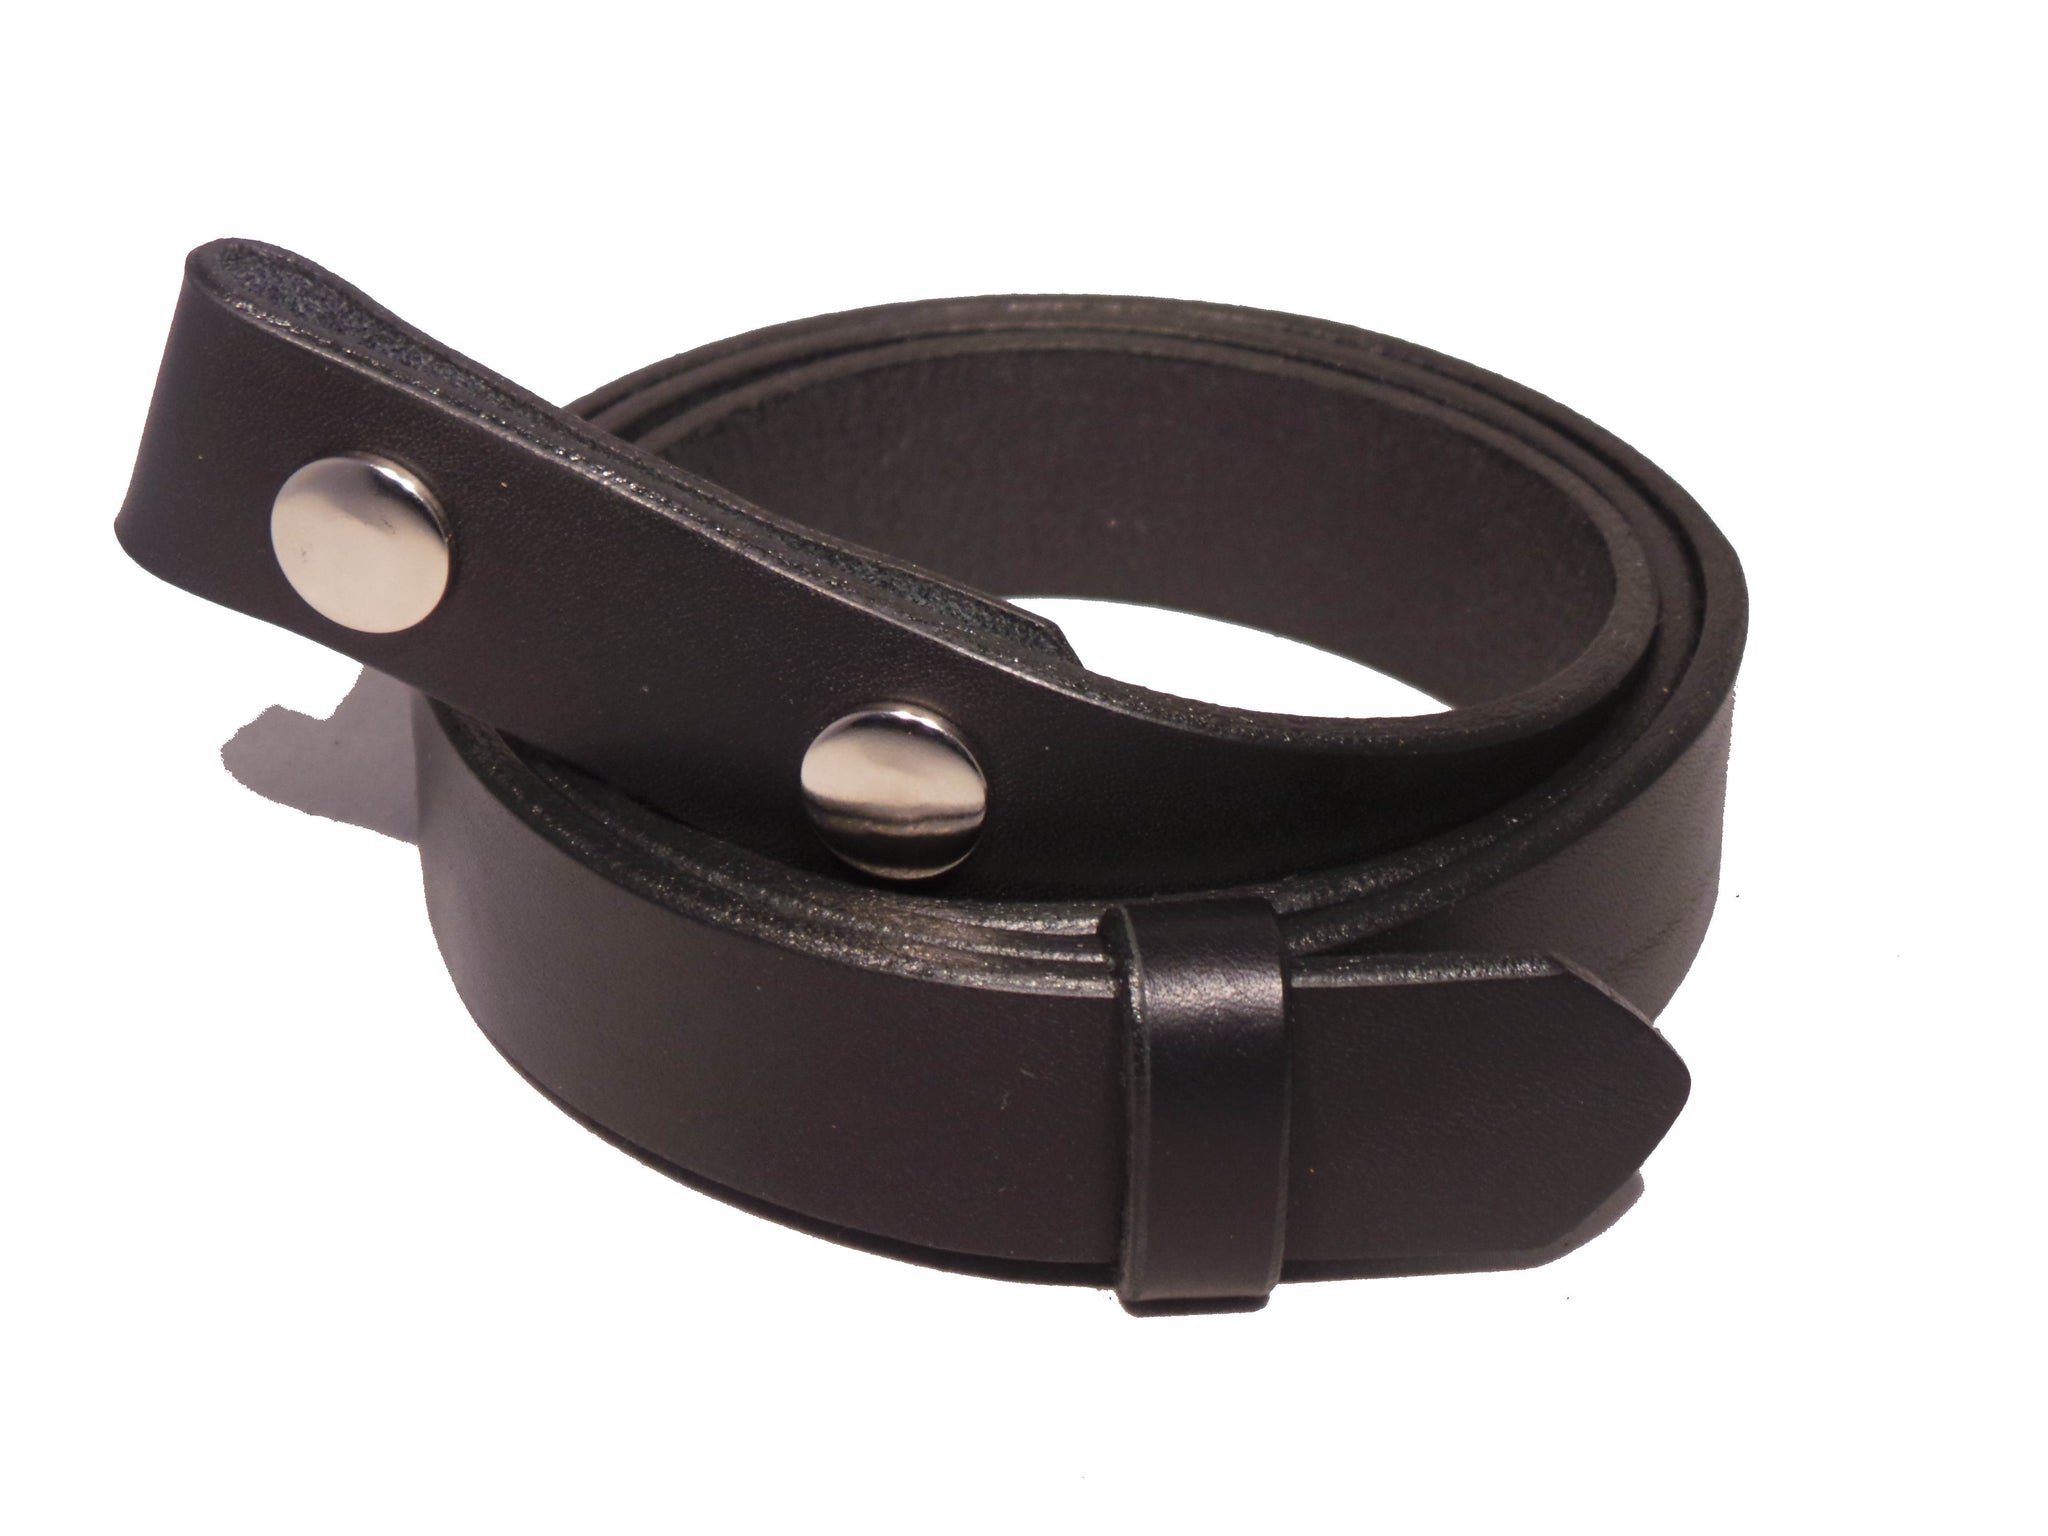 Black Pebble Leather Strap - 1 inch (25mm) Wide - Choose Length